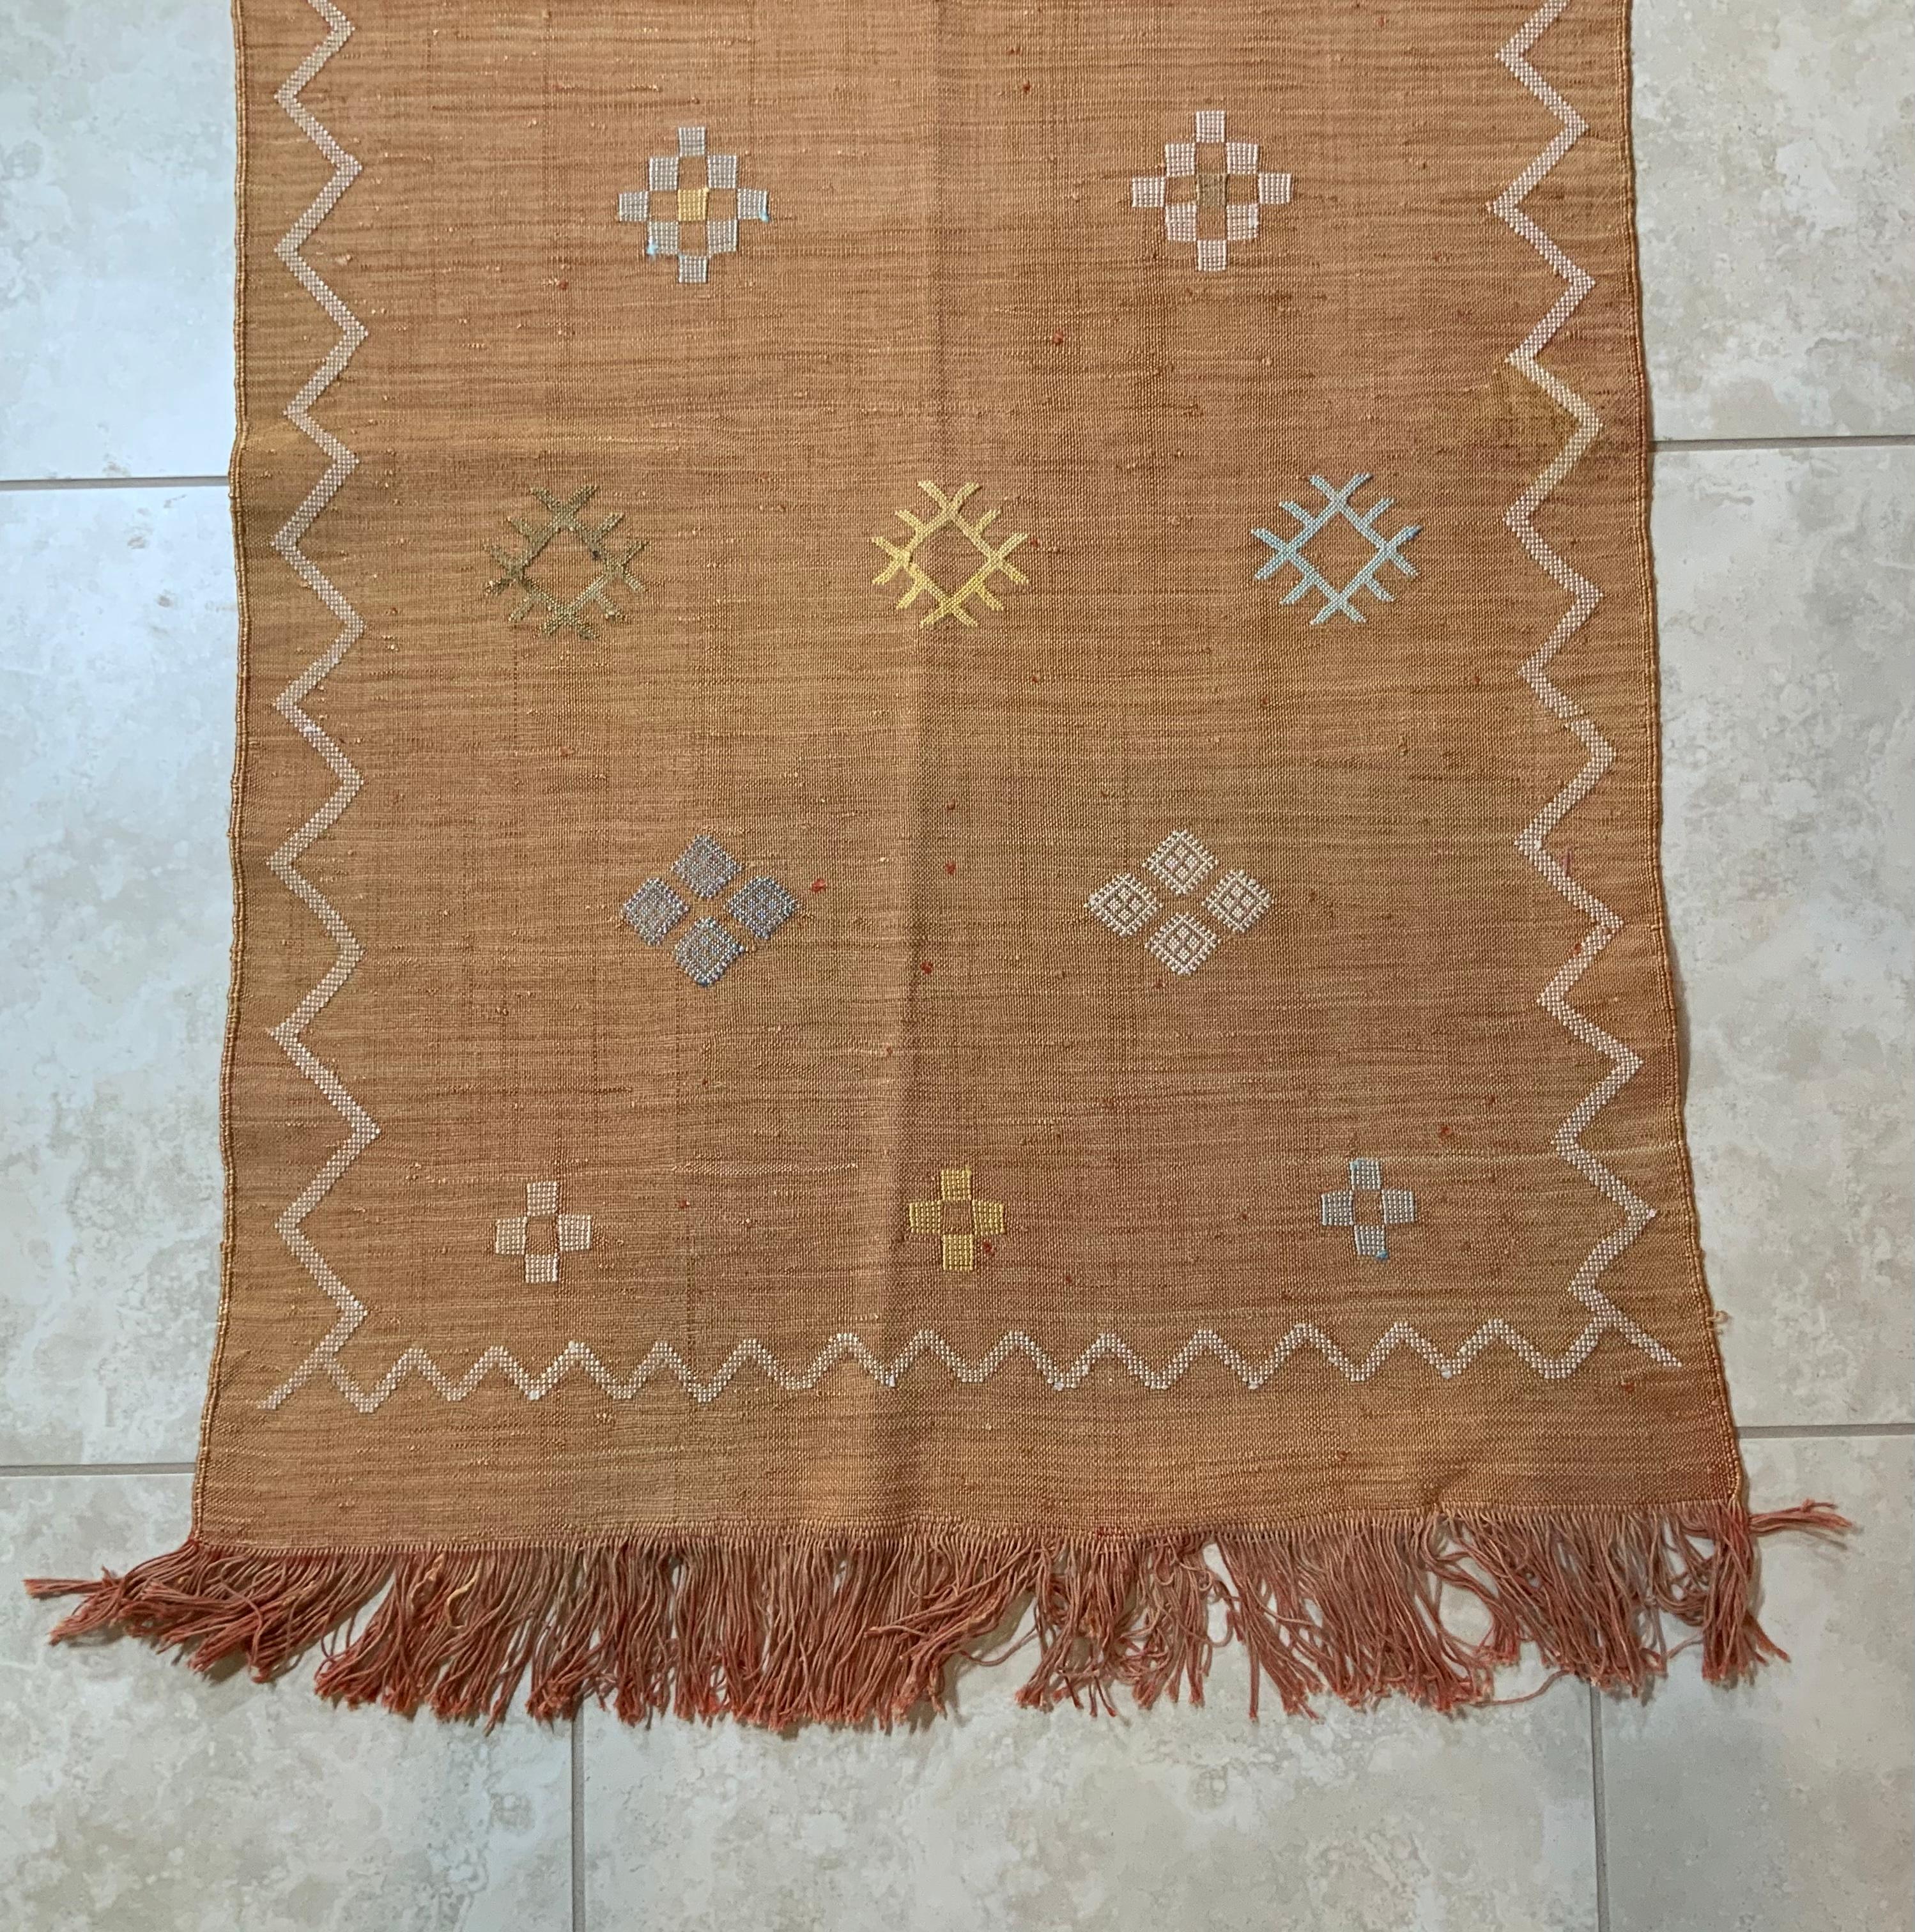 Hand-Woven Hand Woven Moroccan Cactus Silk Style Flat-Weave Kilim Runner